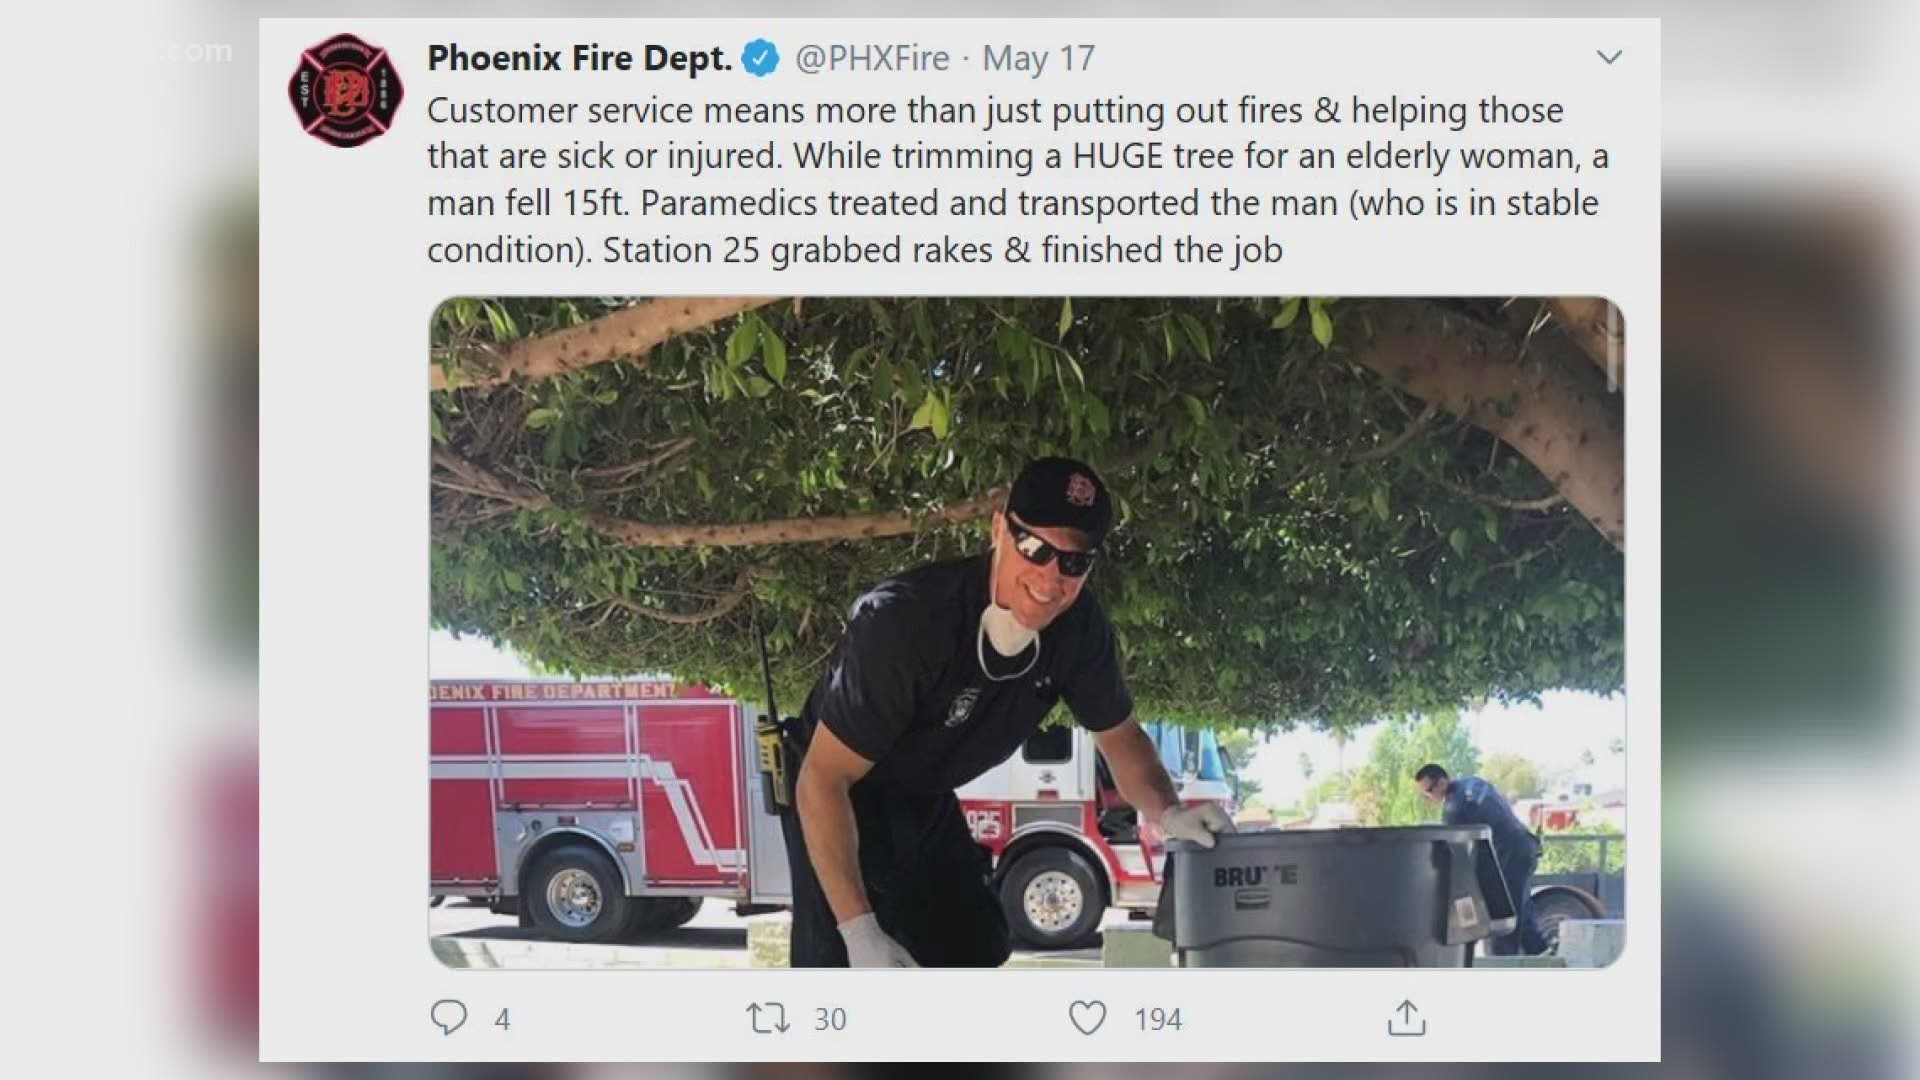 Phoenix Fire crews helped a man after he fell while trimming a huge tree for an elderly client. After treating him, the firefighters went back to finish the job.